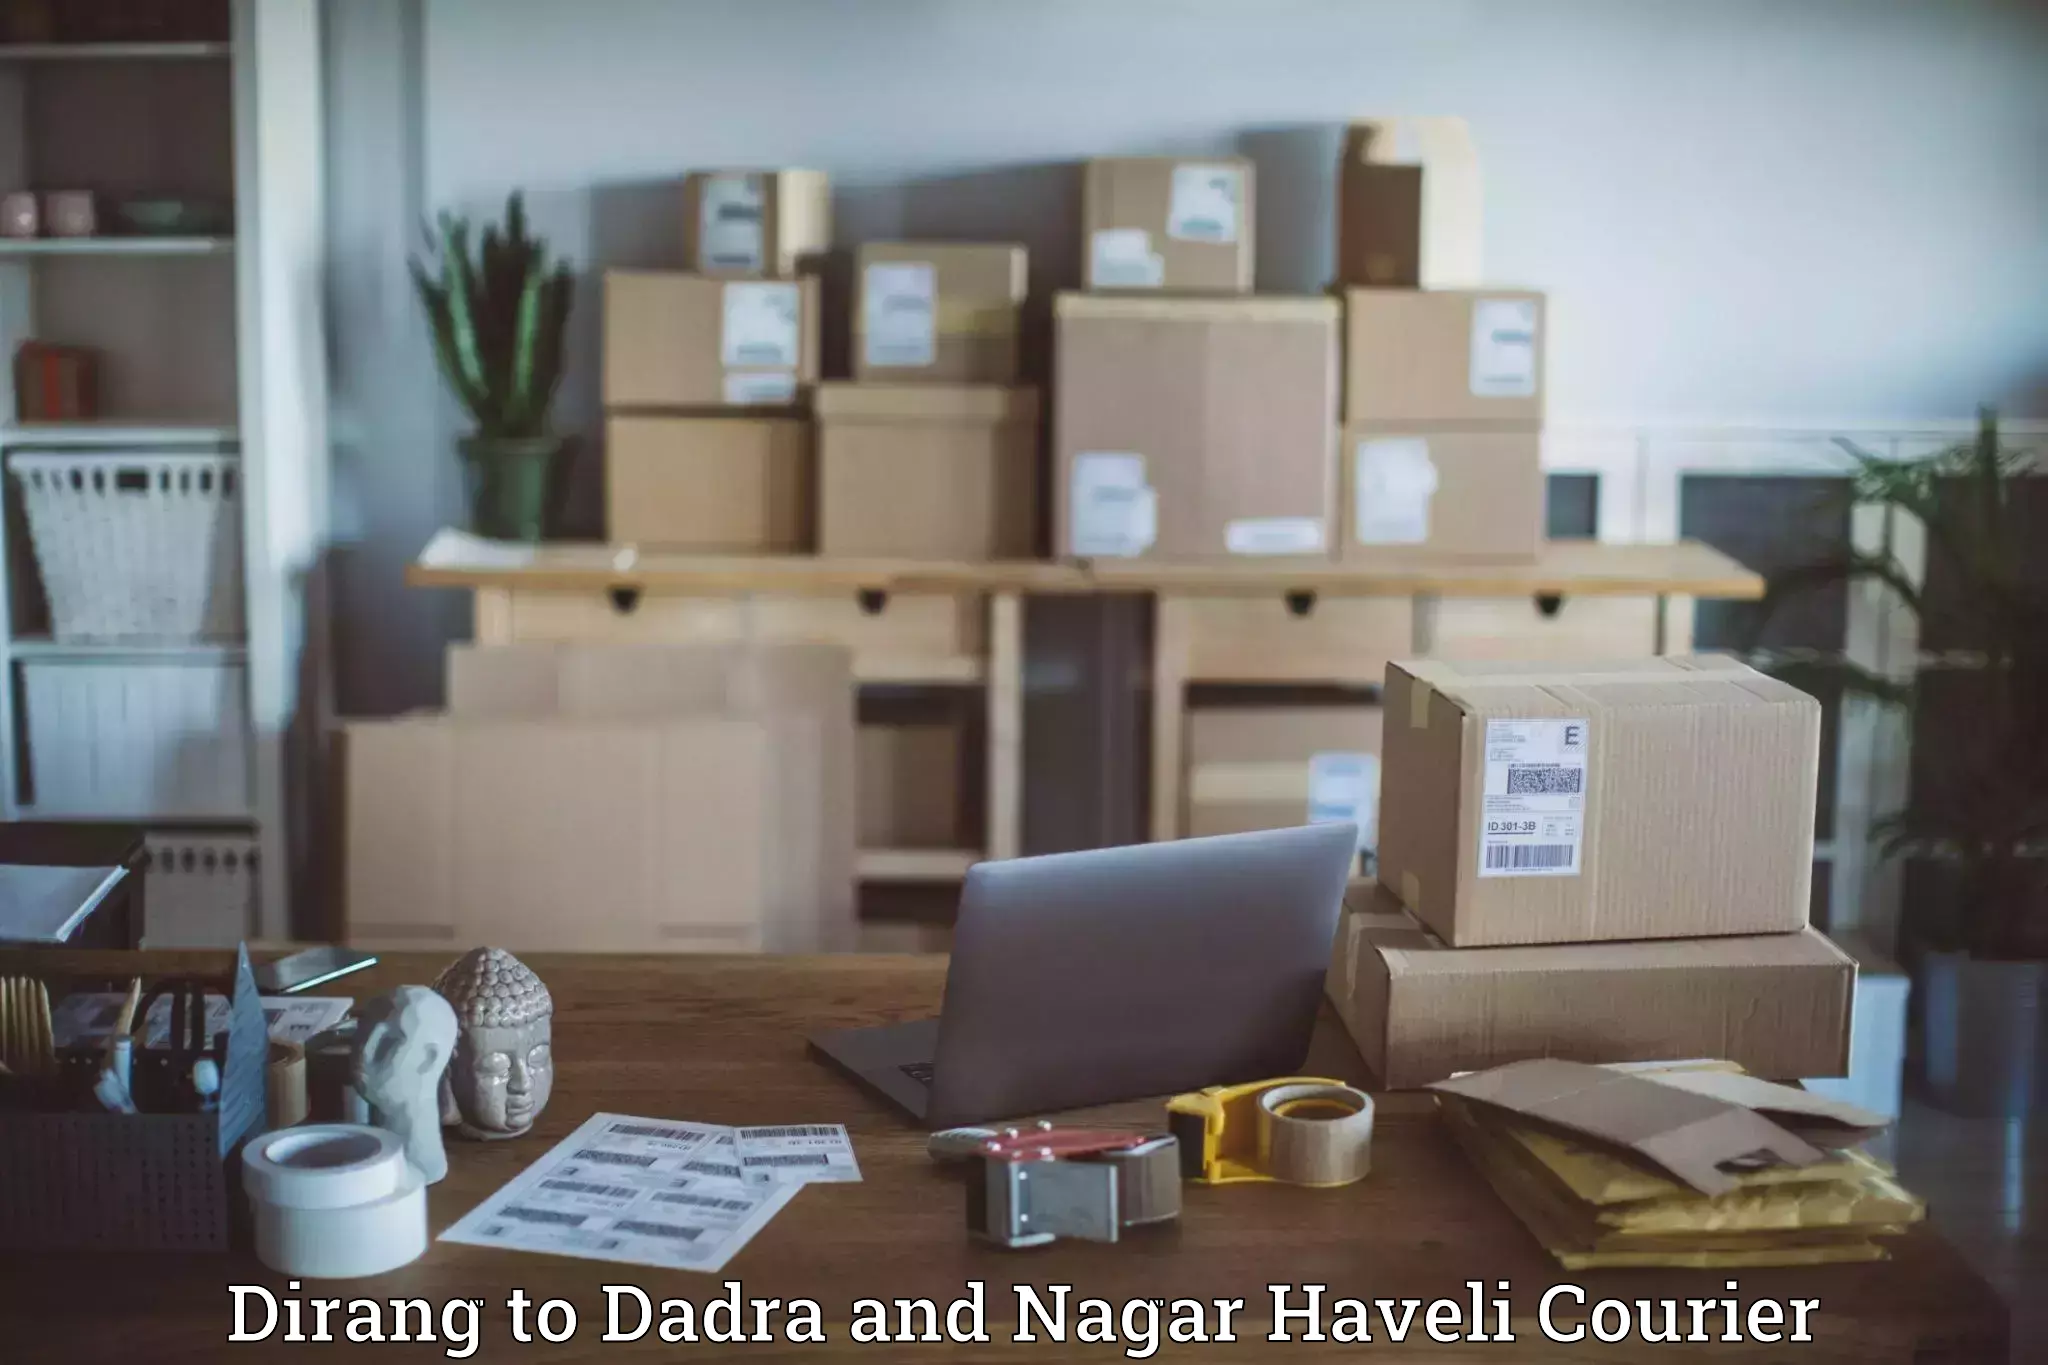 Full-service courier options Dirang to Dadra and Nagar Haveli